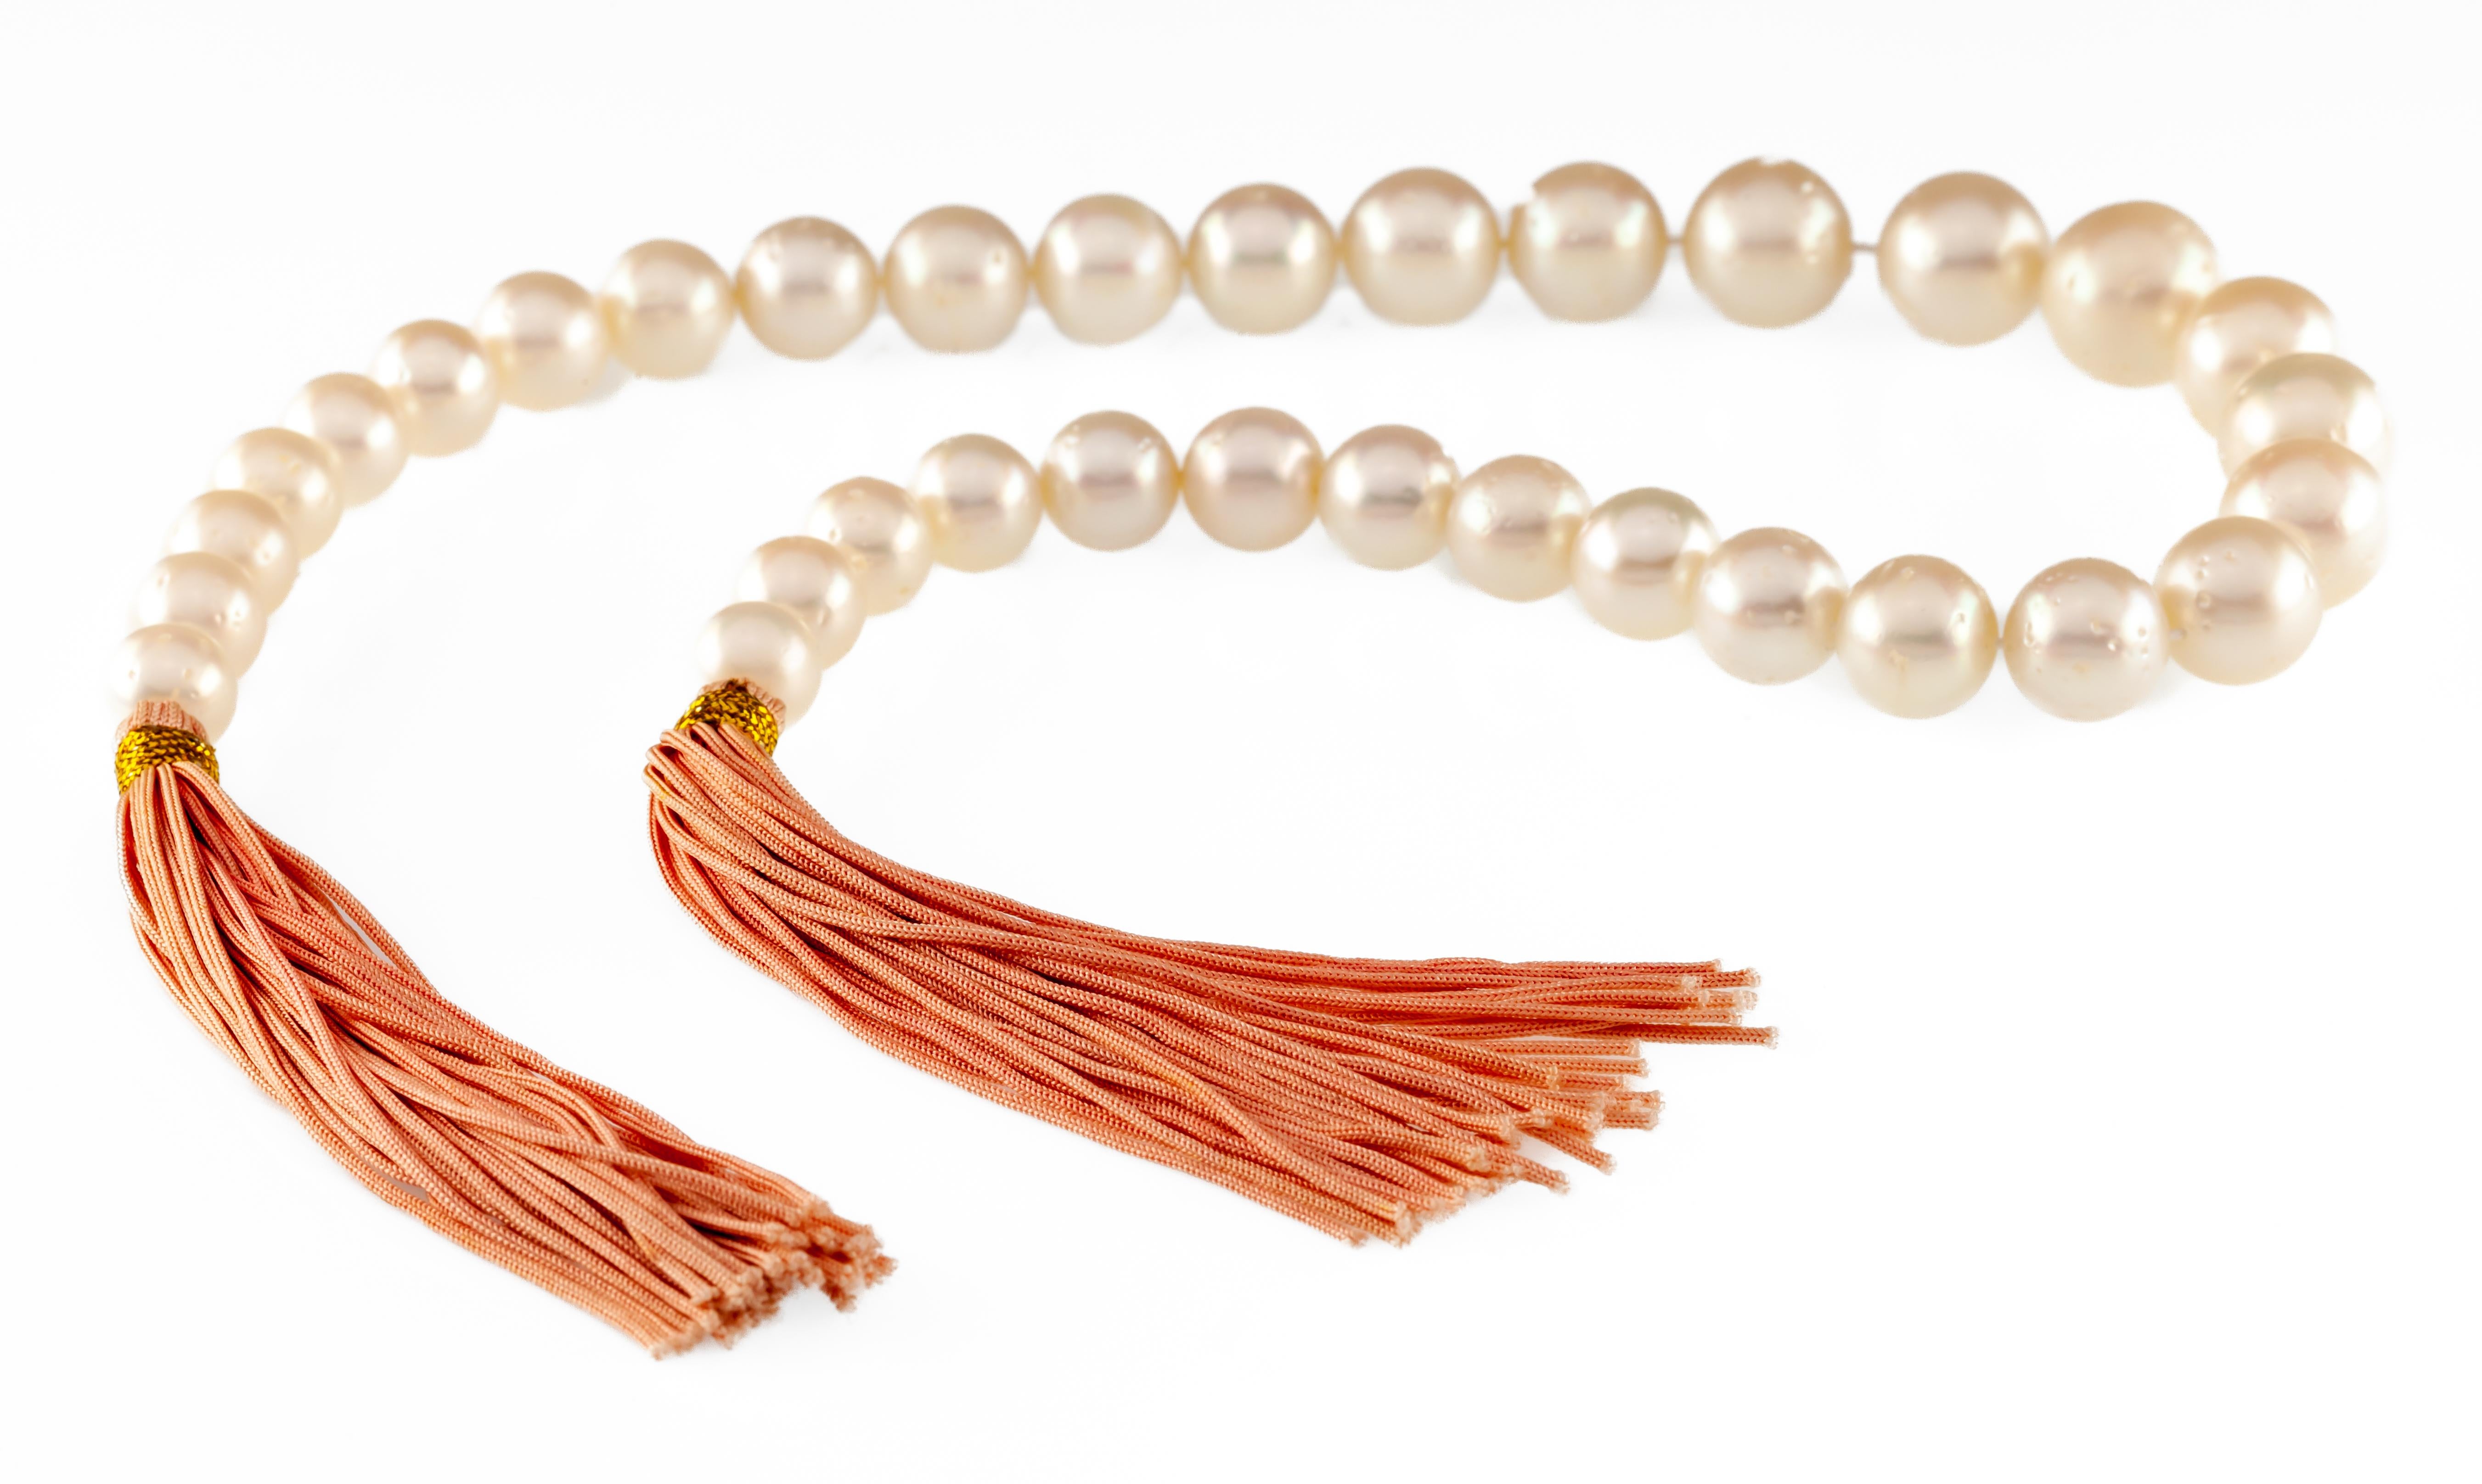 One graduated single cultured pearl strand unknotted
Containing Thirty-Three south sea cultured pearls
11.0 - 16.0 mm in size
The pearls are white in color and exhibiting orient with a medium luster, medium nacre, mostly round, spotted with good